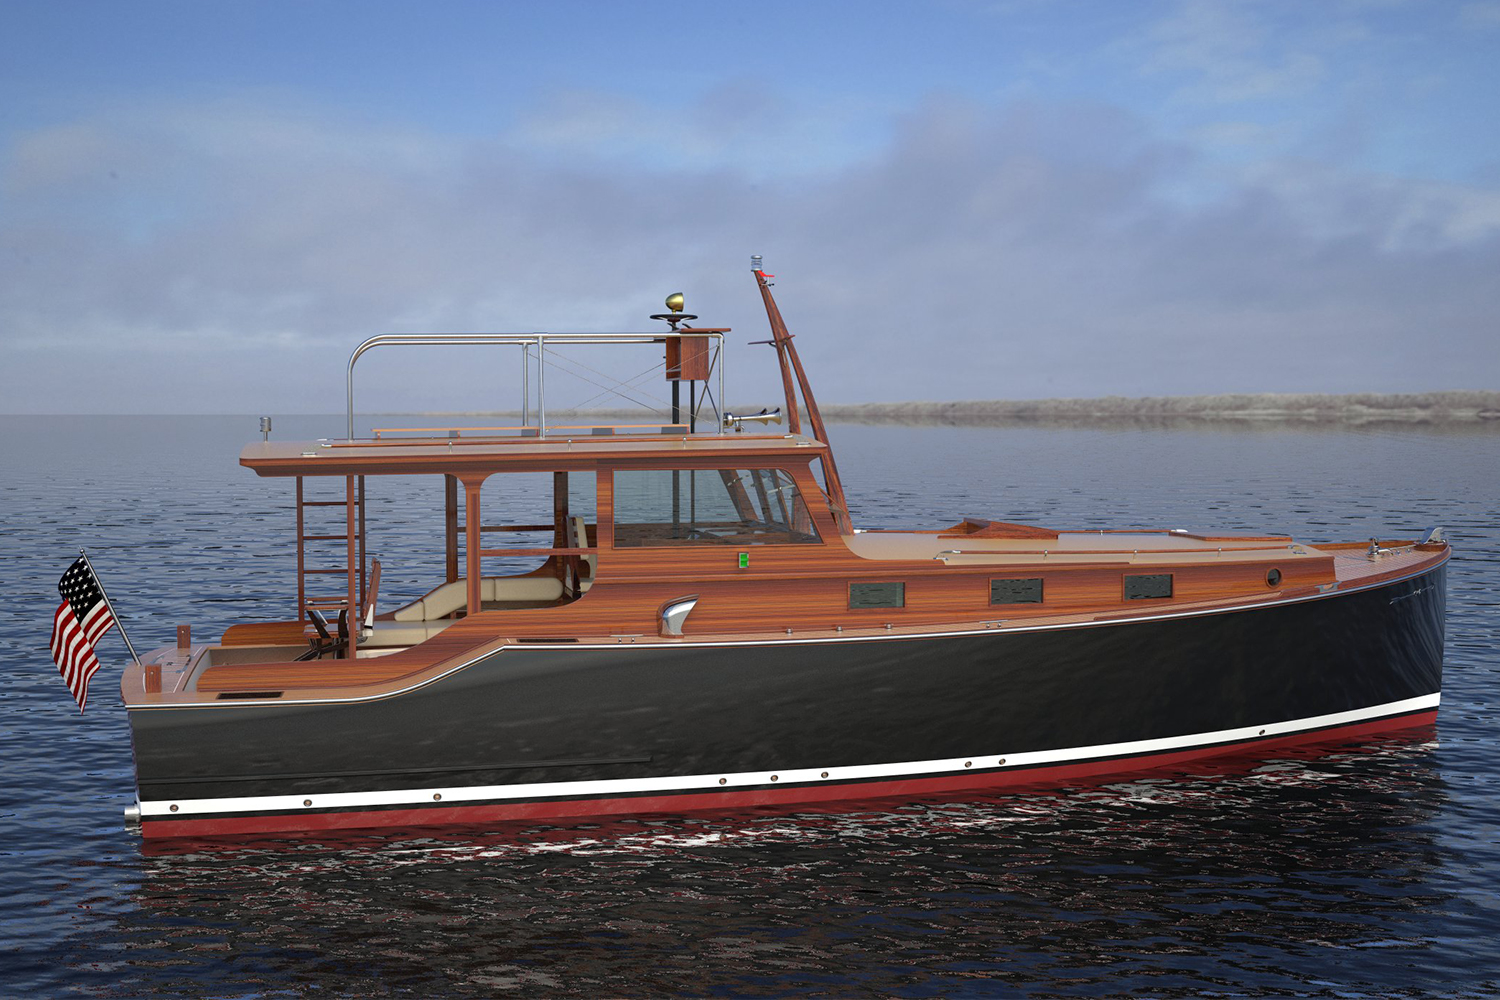 Ernest Hemingway’s Boat Pilar Is Back From the Dead, and You Can Buy One